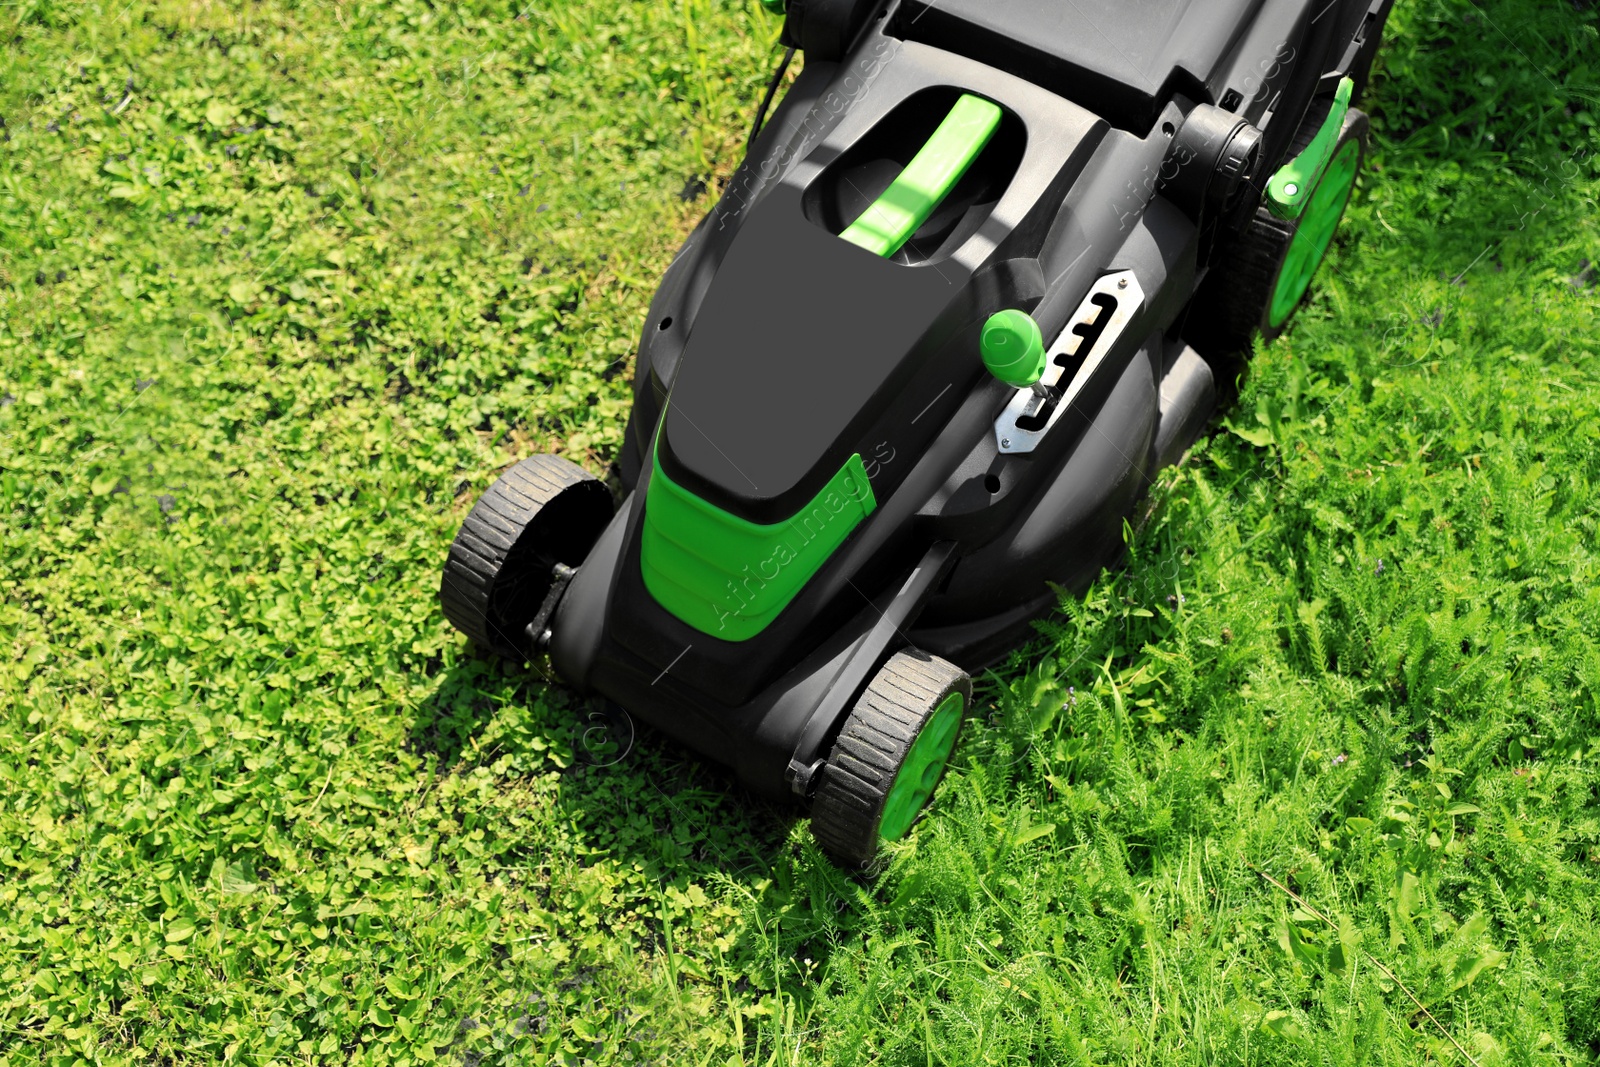 Photo of Cutting green grass with lawn mower in garden, above view